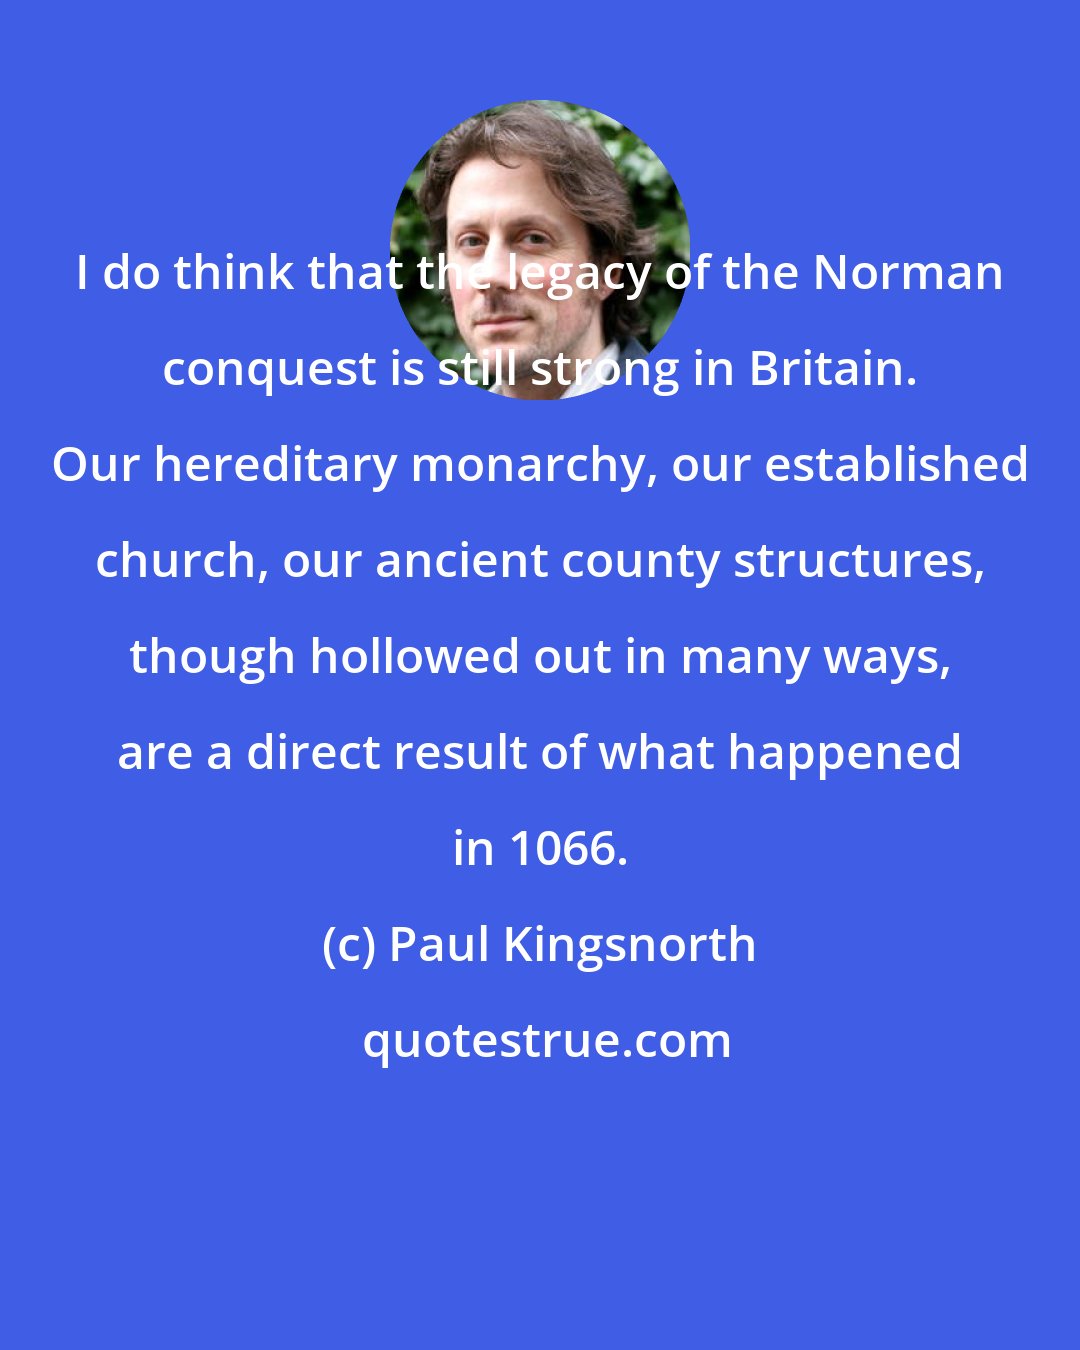 Paul Kingsnorth: I do think that the legacy of the Norman conquest is still strong in Britain. Our hereditary monarchy, our established church, our ancient county structures, though hollowed out in many ways, are a direct result of what happened in 1066.